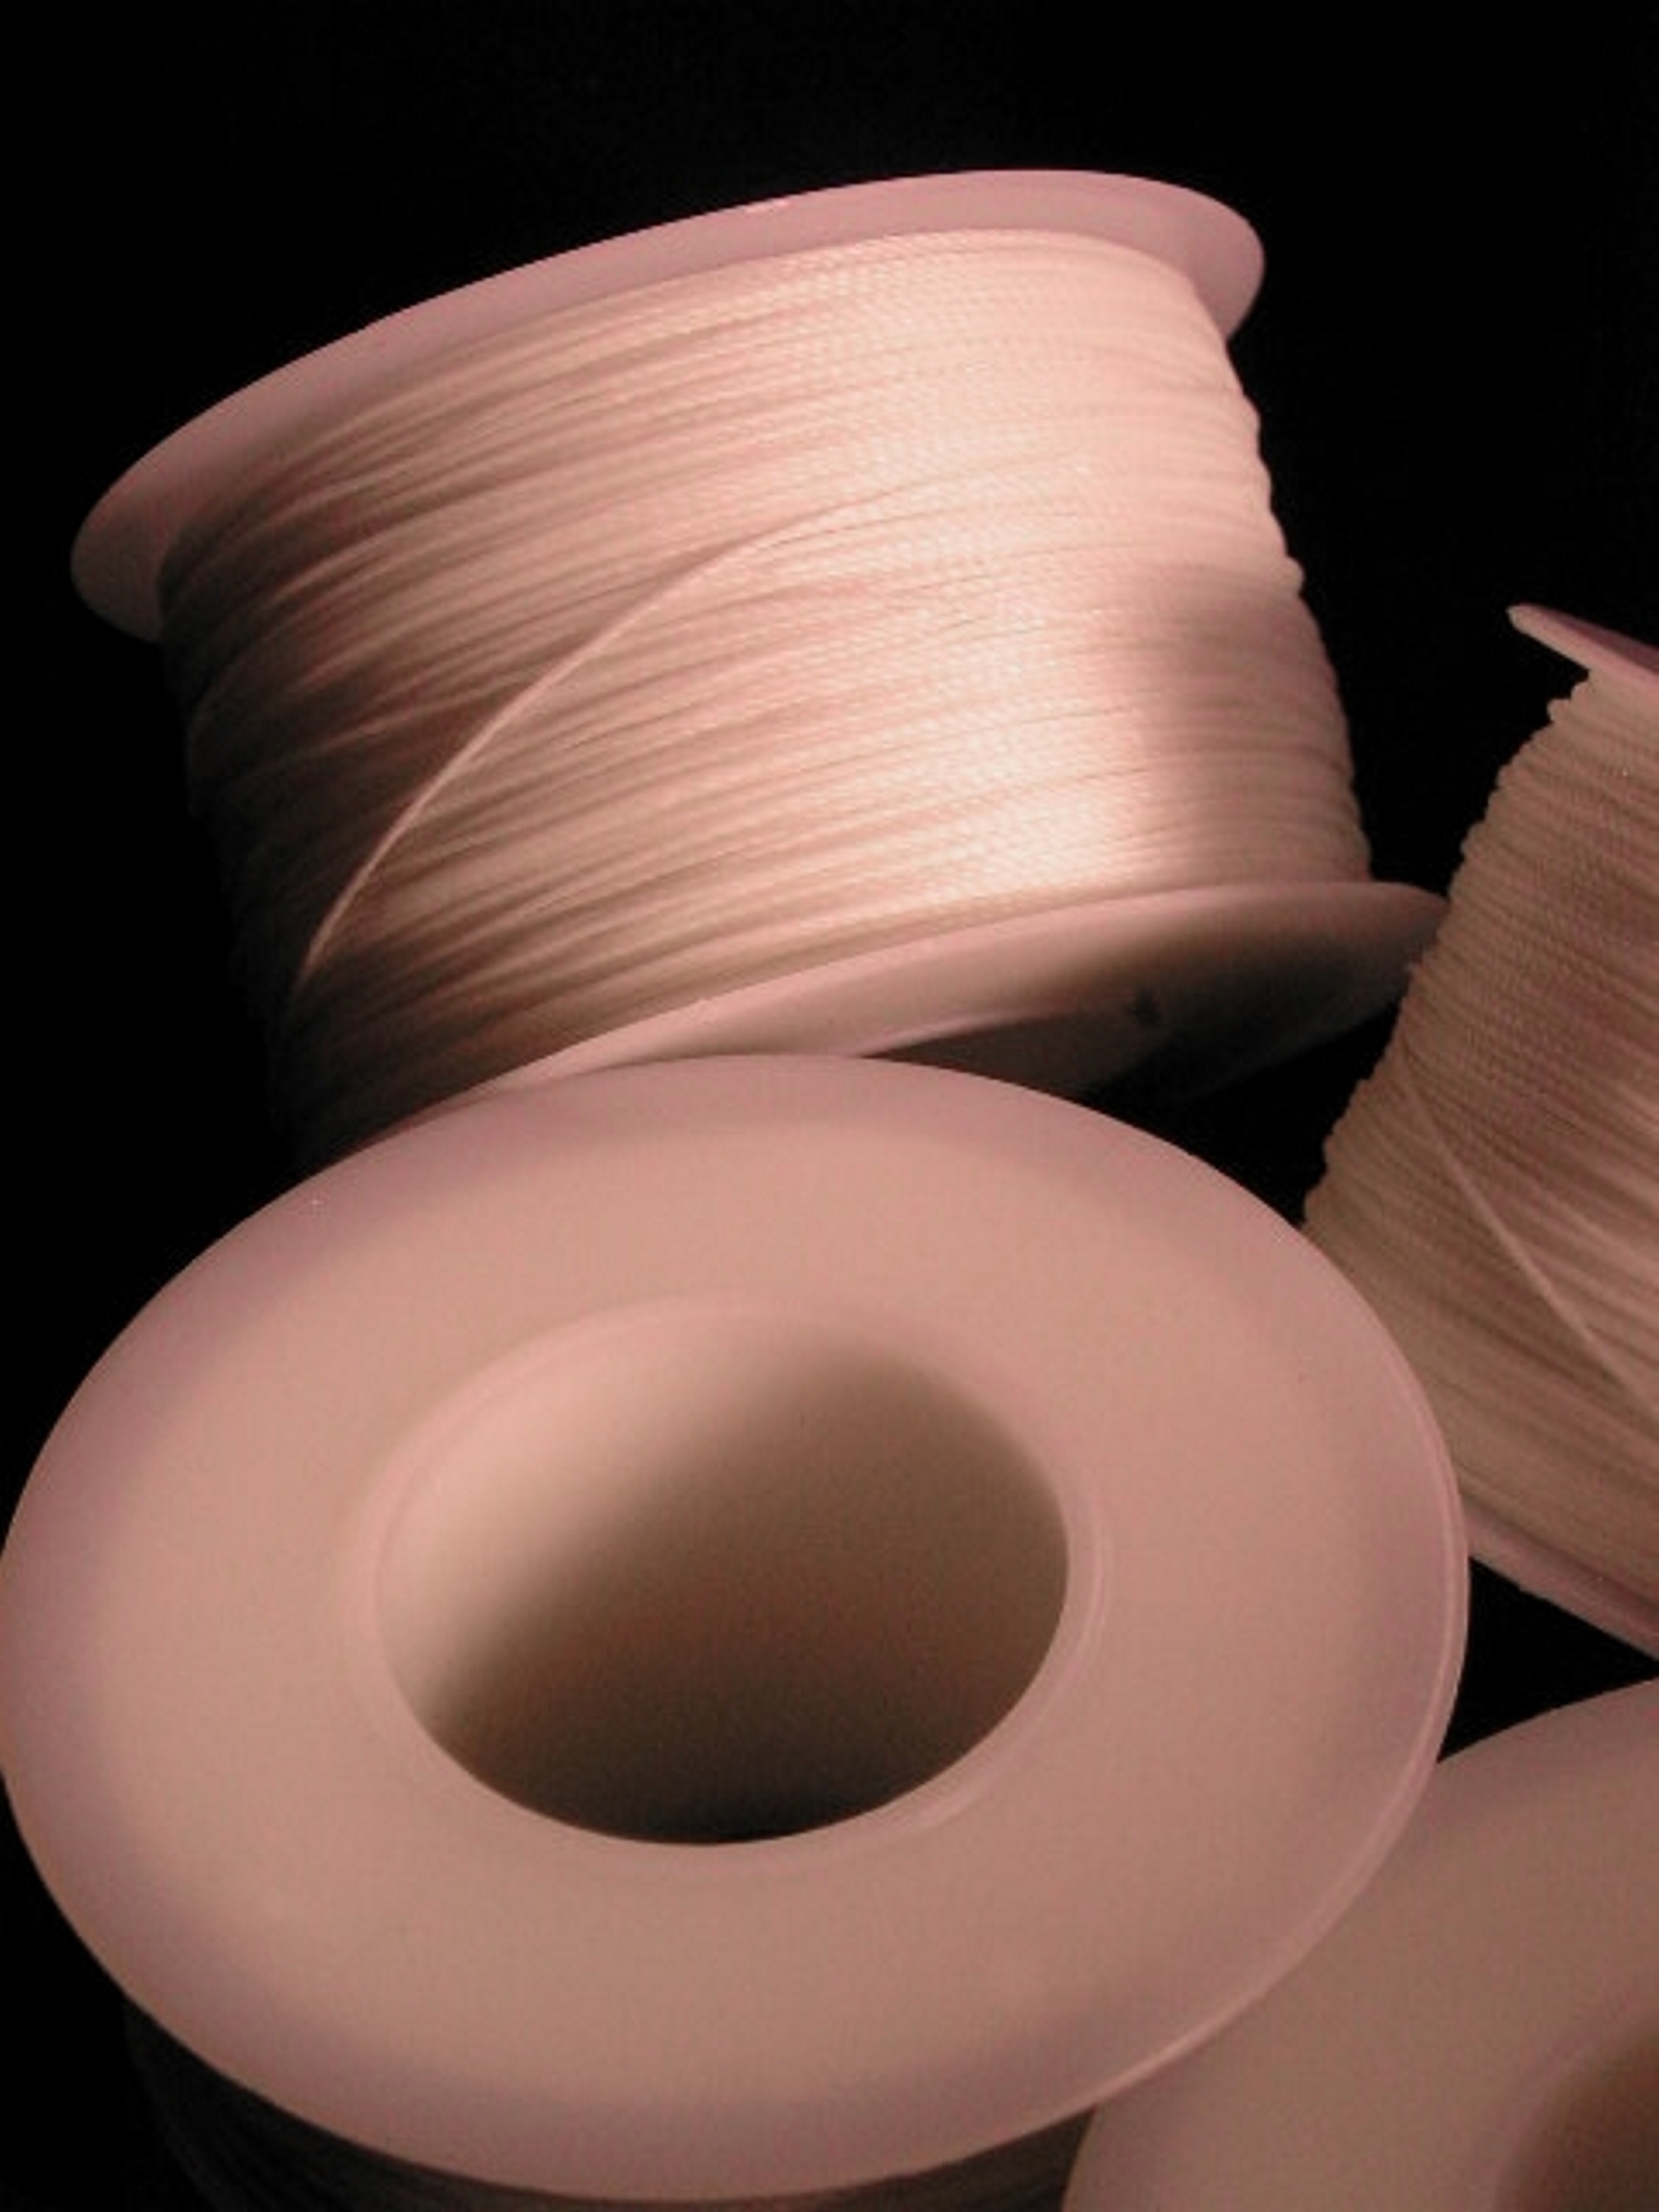 Trade wholesale suppliers 2mm 4AA-RN Nylon cord, Approx 280m spool